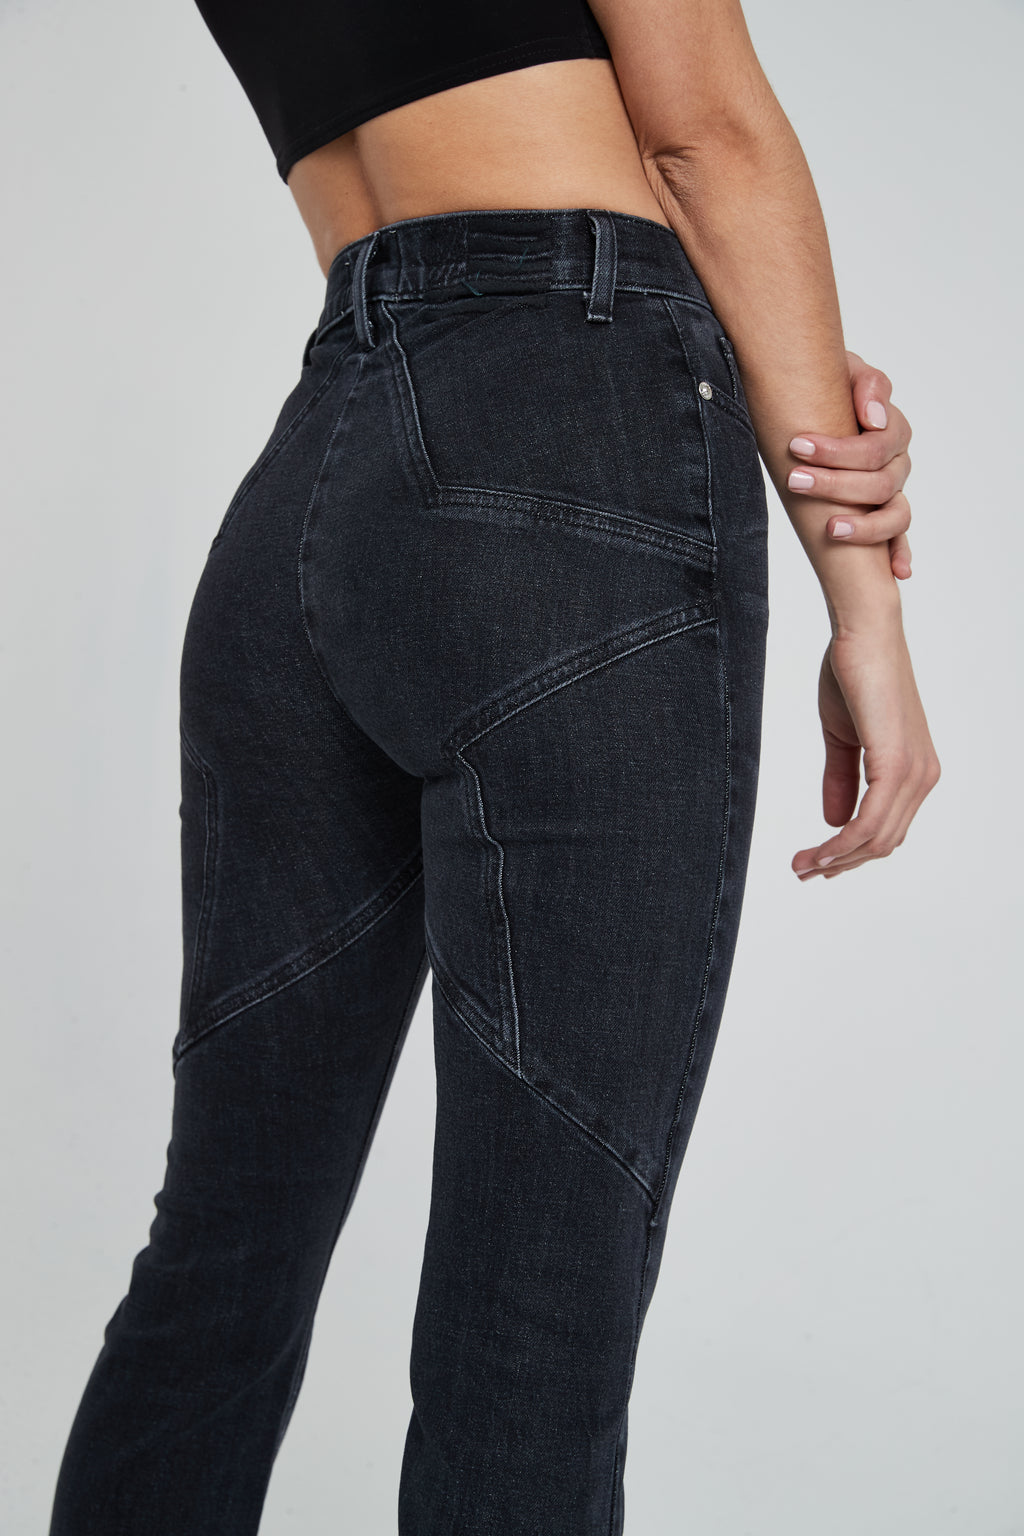 revice flare jeans